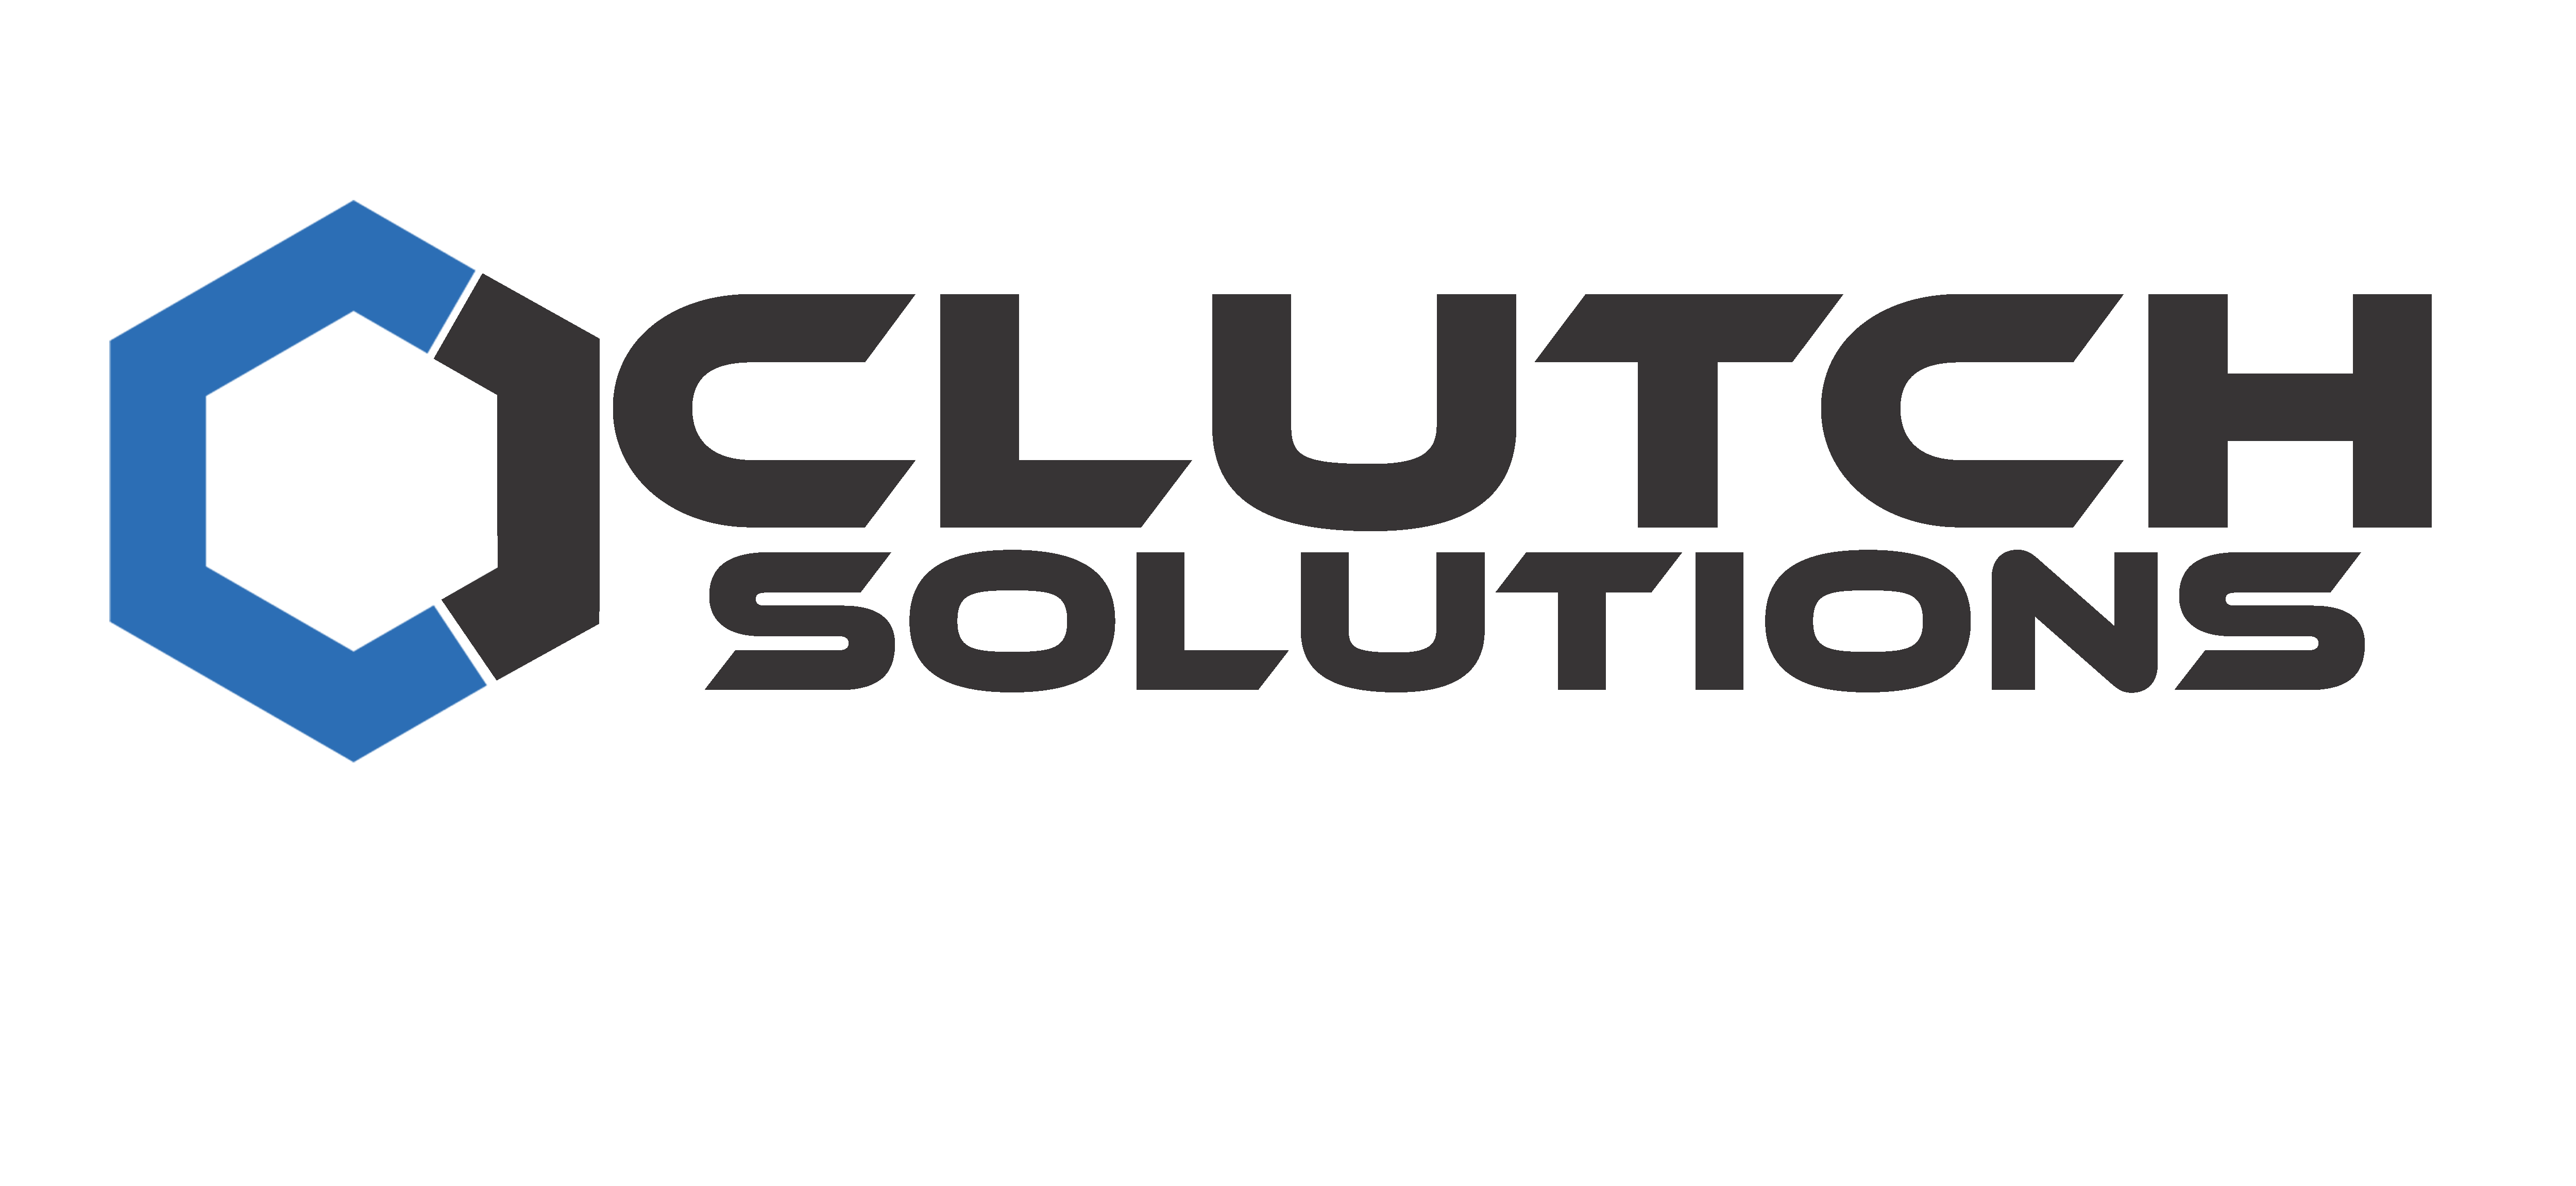 Cox Certified Routers and Modems | Clutch Solutions